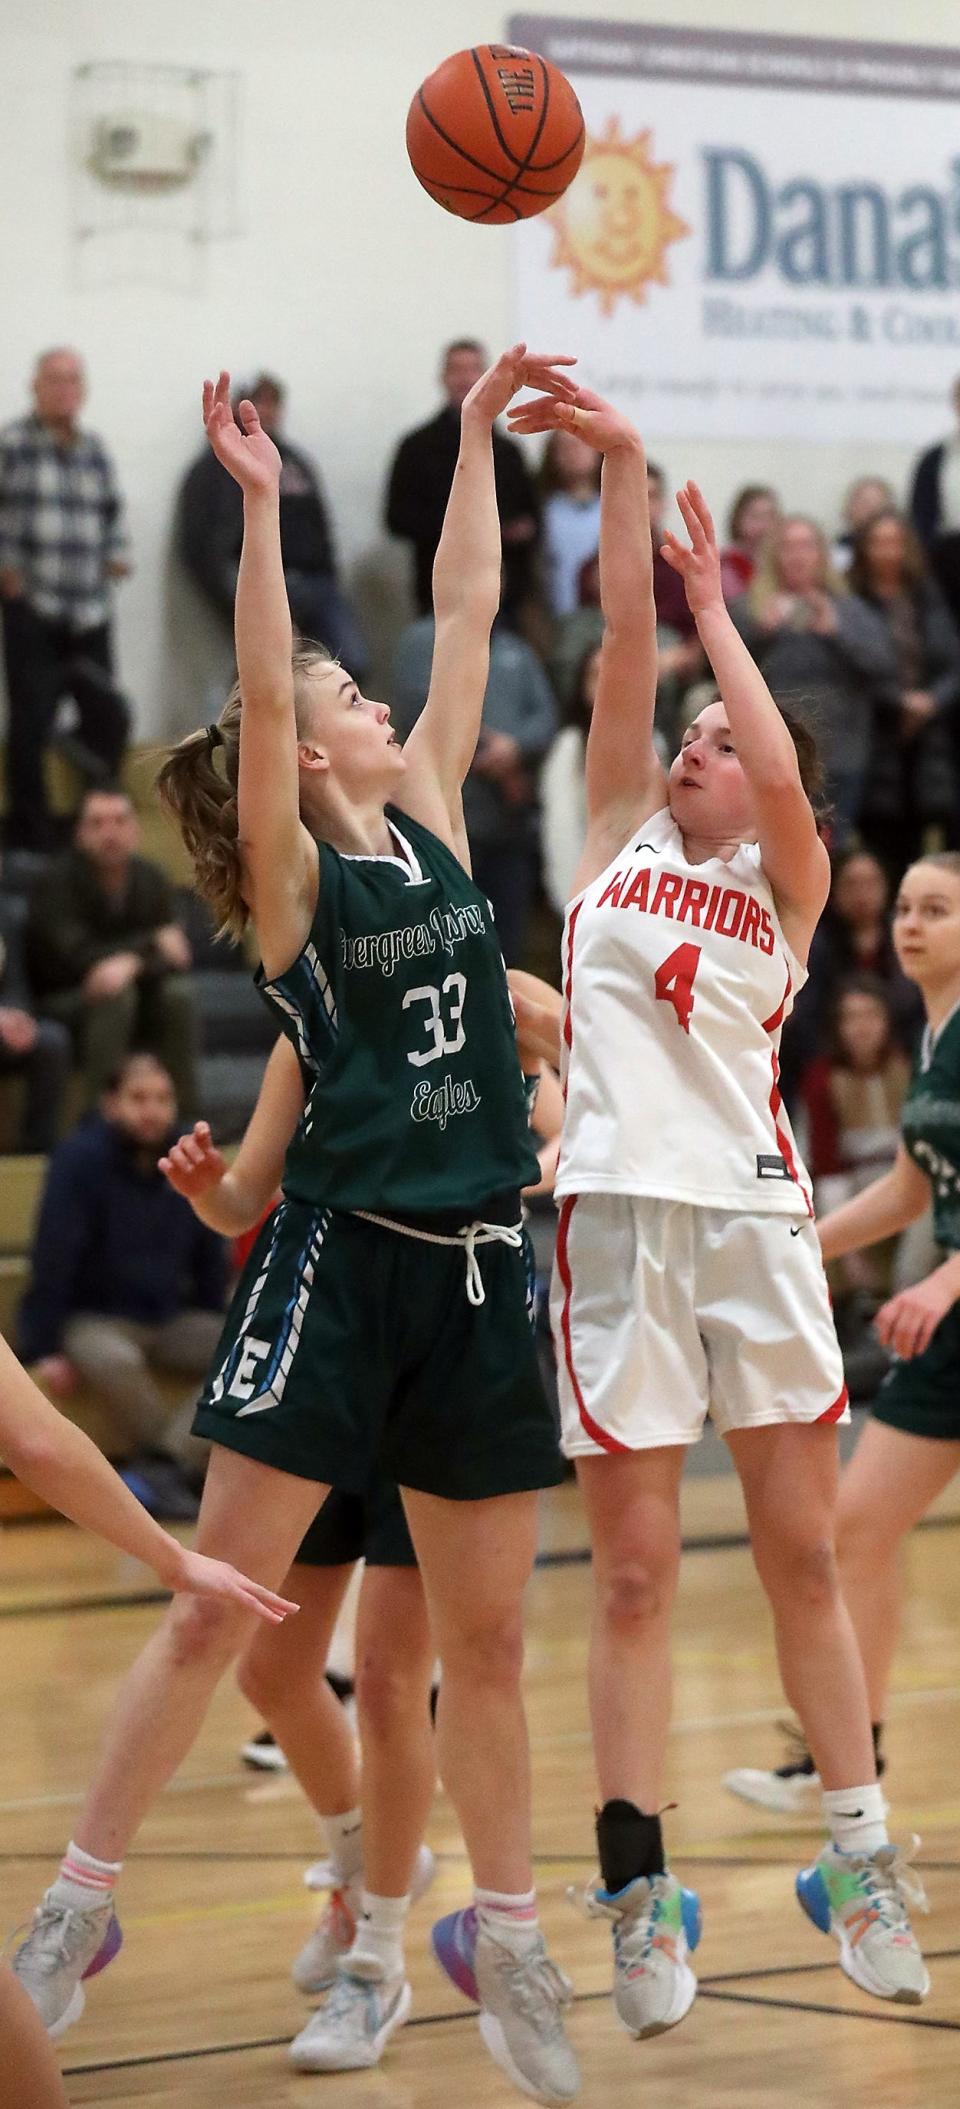 Crosspoint's Anna Kuske (4) takes a shot over Evergreen Lutheran's Hannah Rodmyre (33) during the Sea-Tac League 1B girls tournament on Feb. 8. Evergreen Lutheran won the game 29-27.